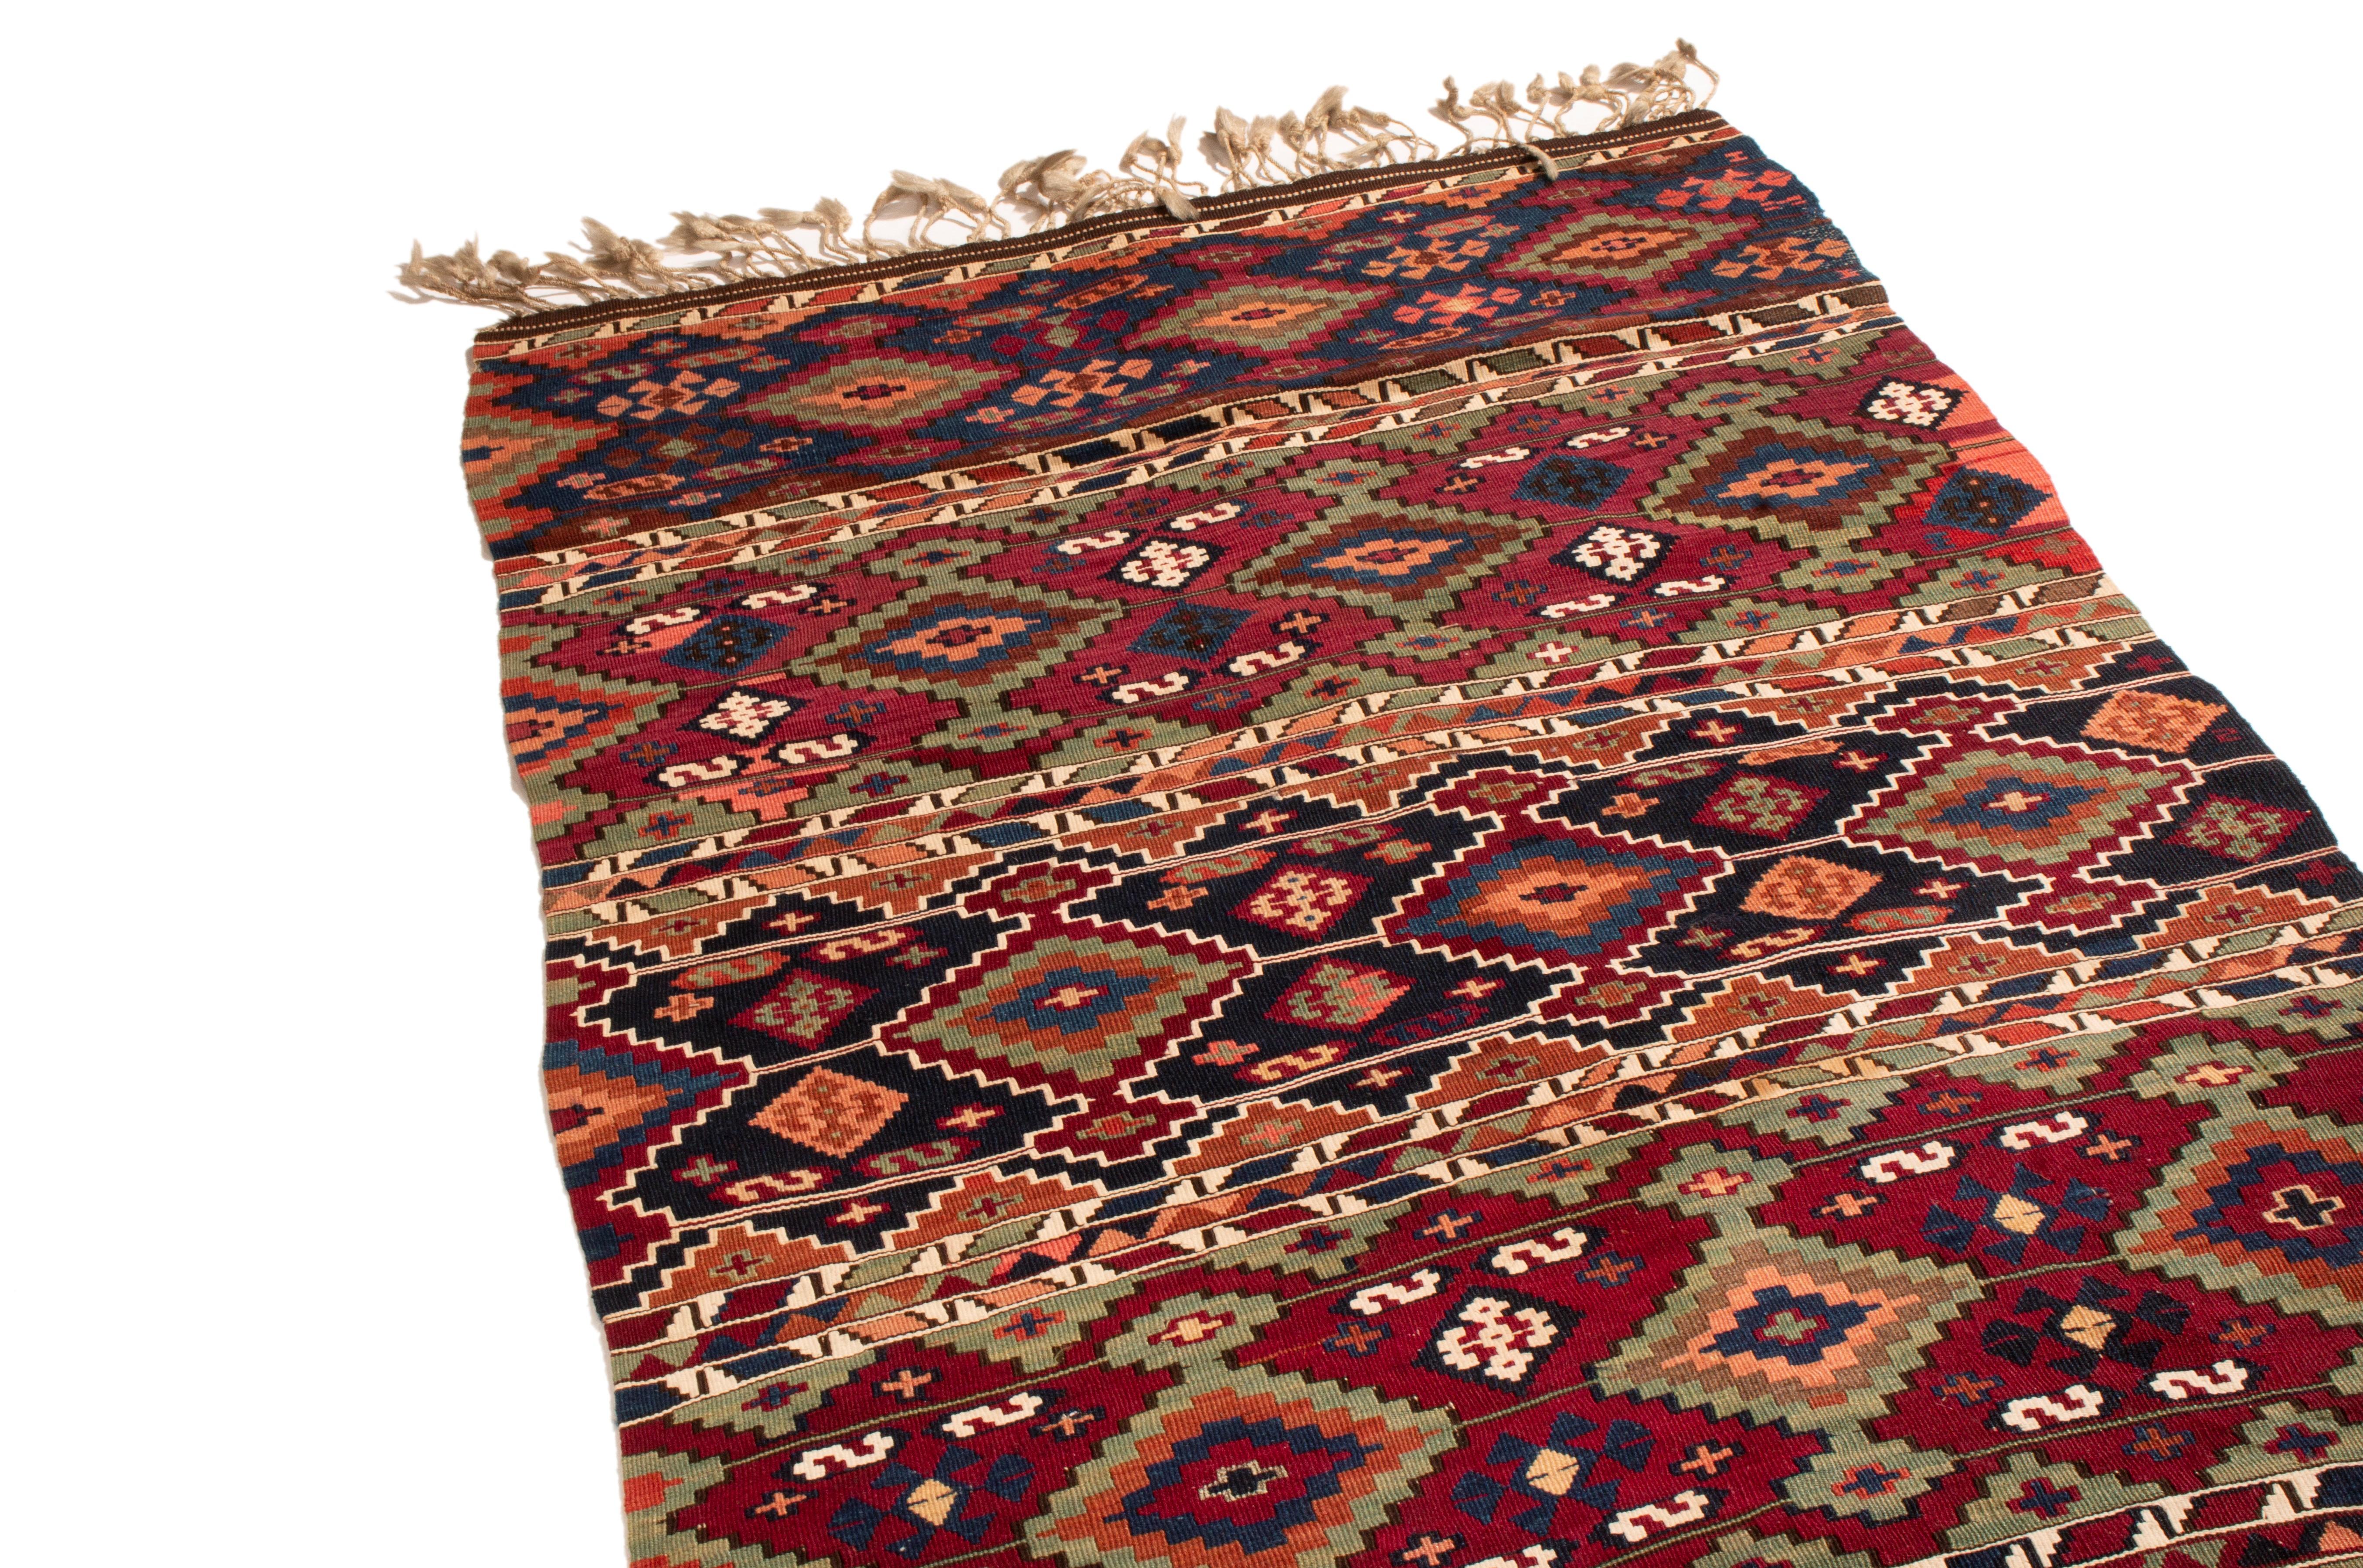 Originating from Turkey between 1900-1920, this antique geometric wool Kilim rug features a distinct combination of both iconic and seldom-seen Turkish symbols. Flat-woven in high-quality wool, the alternating rows of burgundy red and navy blue with